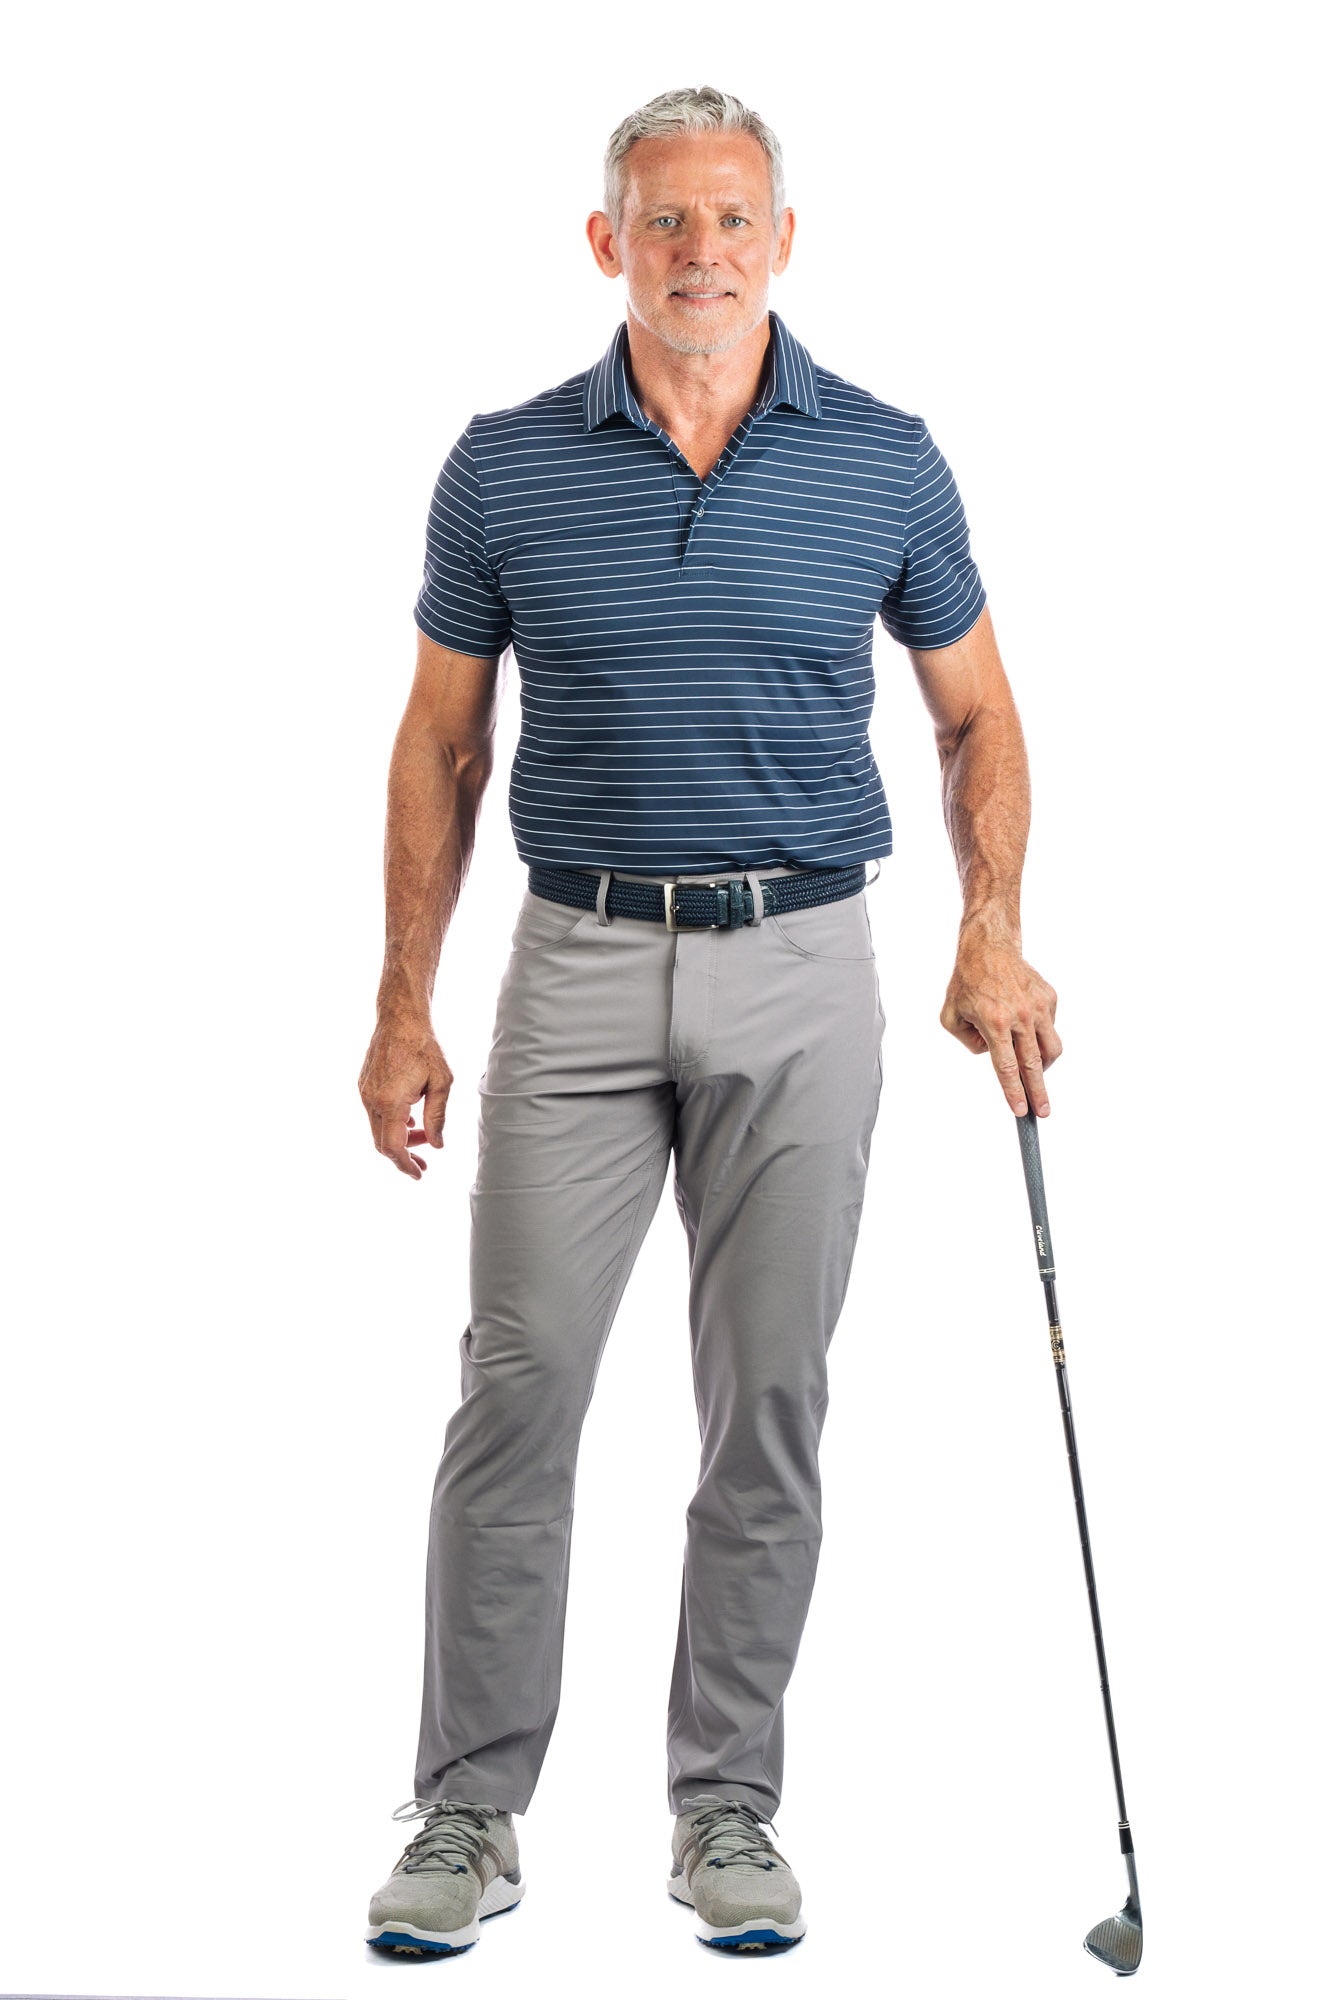 A model posing in a navy striped golf polo and grey pants, holding a golf club.